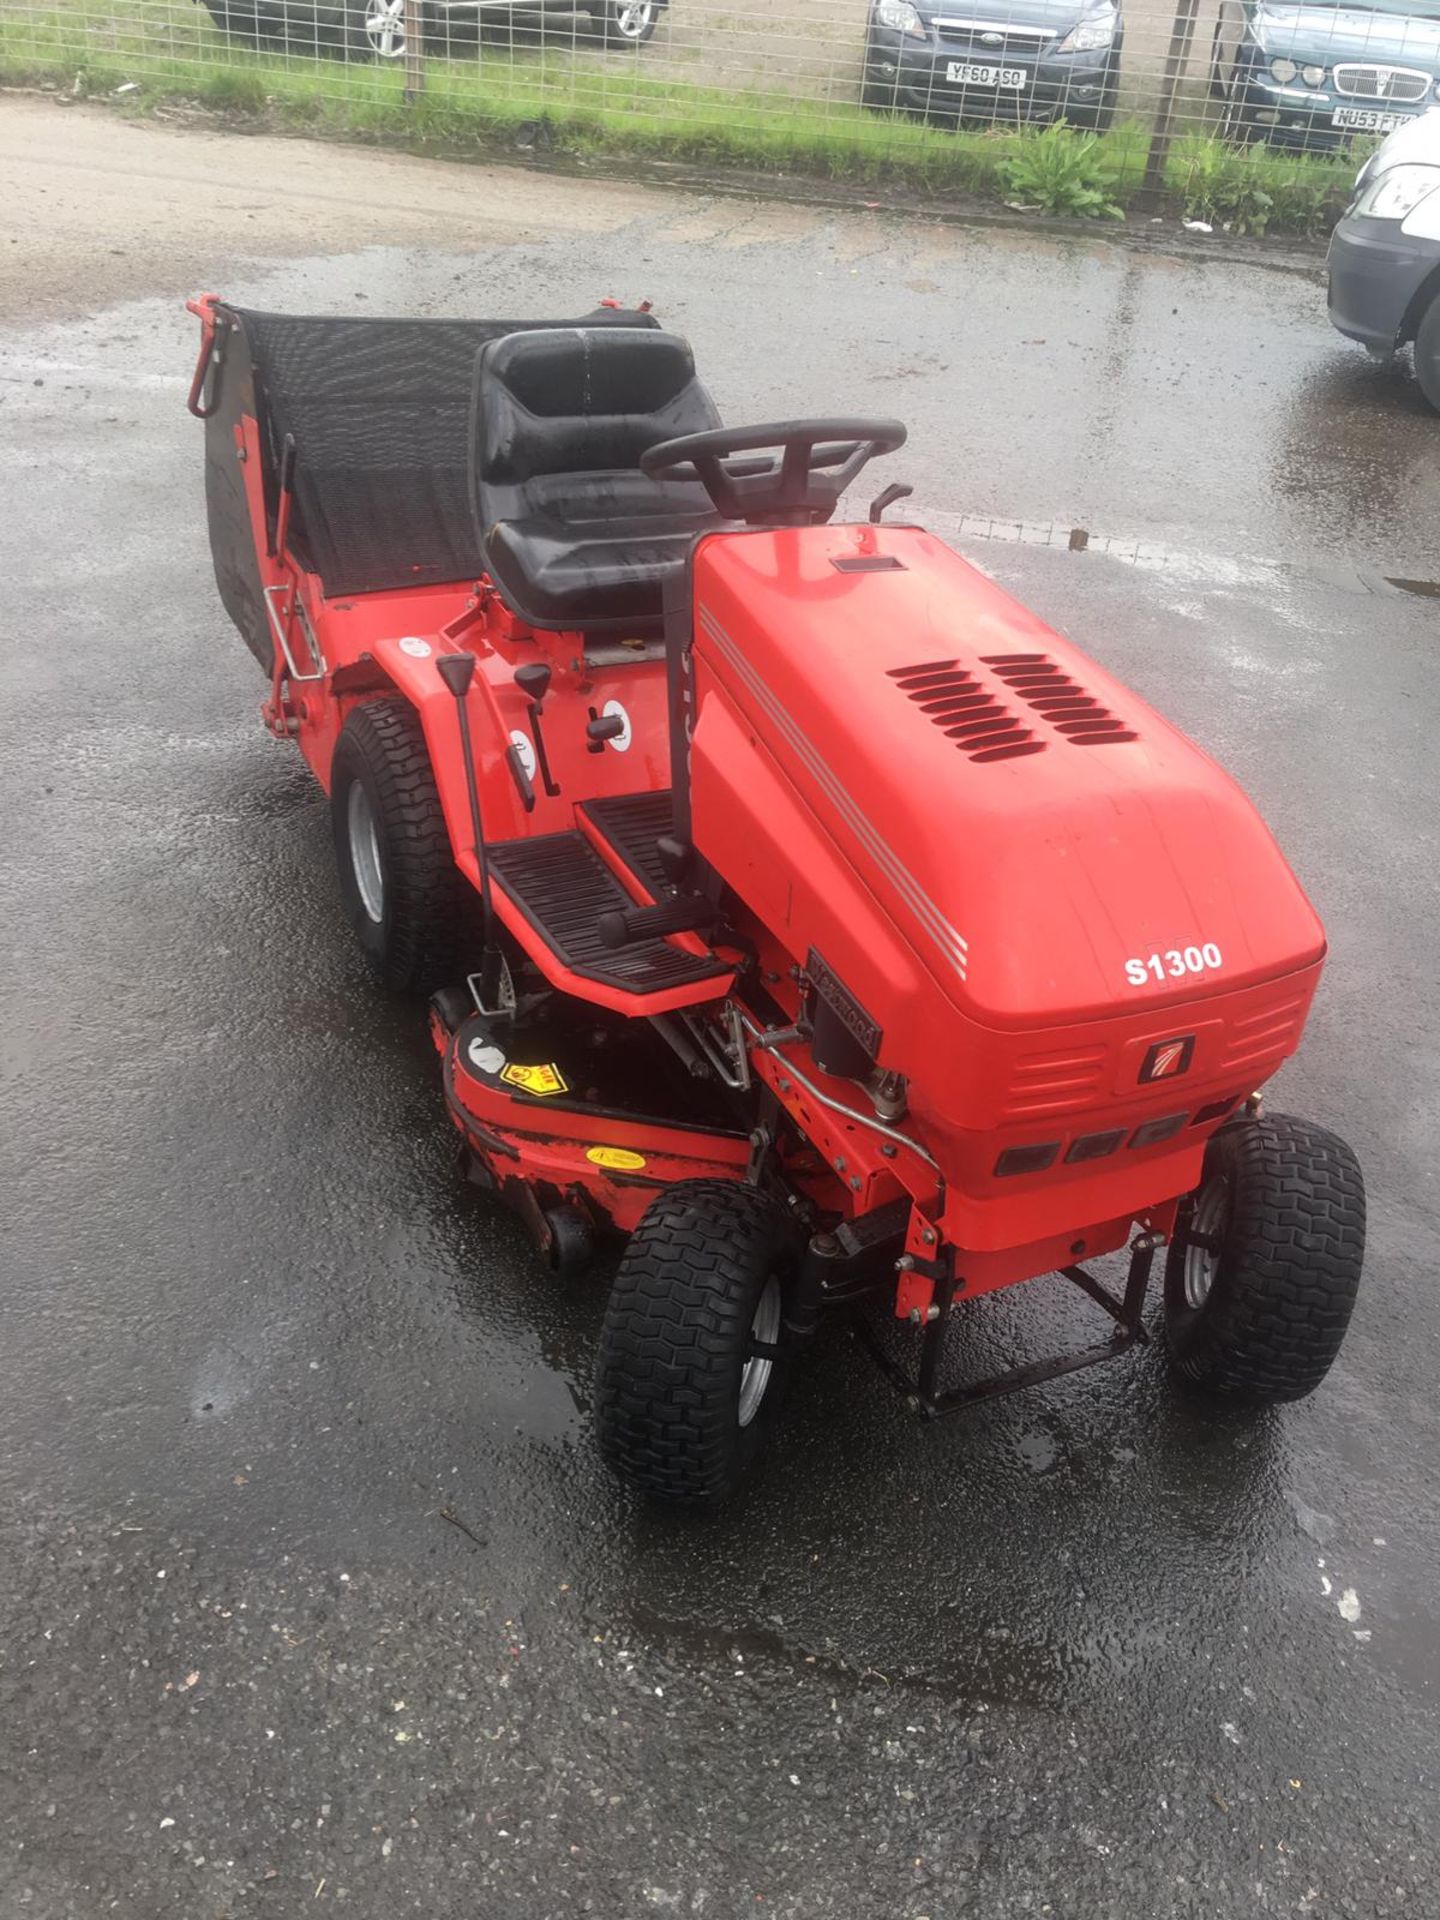 WESTWOOD S1300/36 RIDE ON LAWN MOWER, BRIGGS AND STRATTON ENGINE, REAR GRASS COLLECTOR *NO VAT*